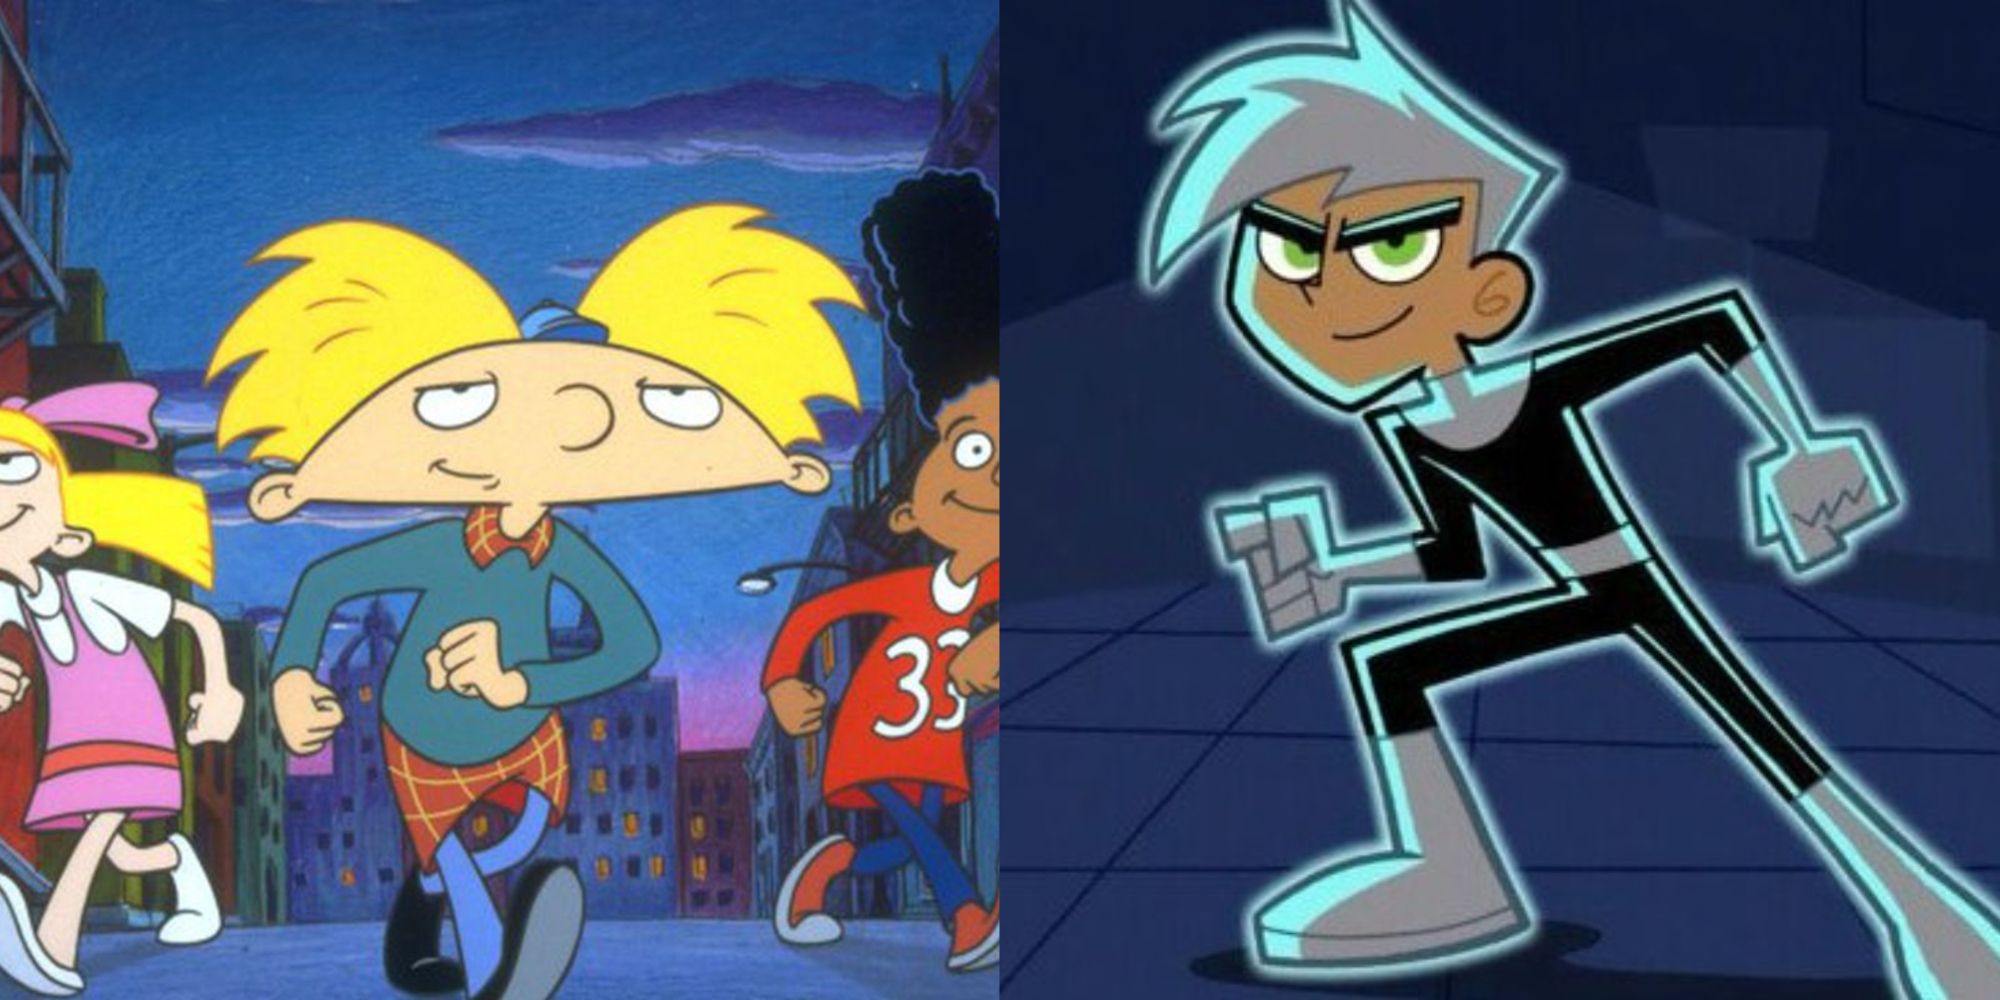 Danny Phantom and the gang from Hey Arnold!